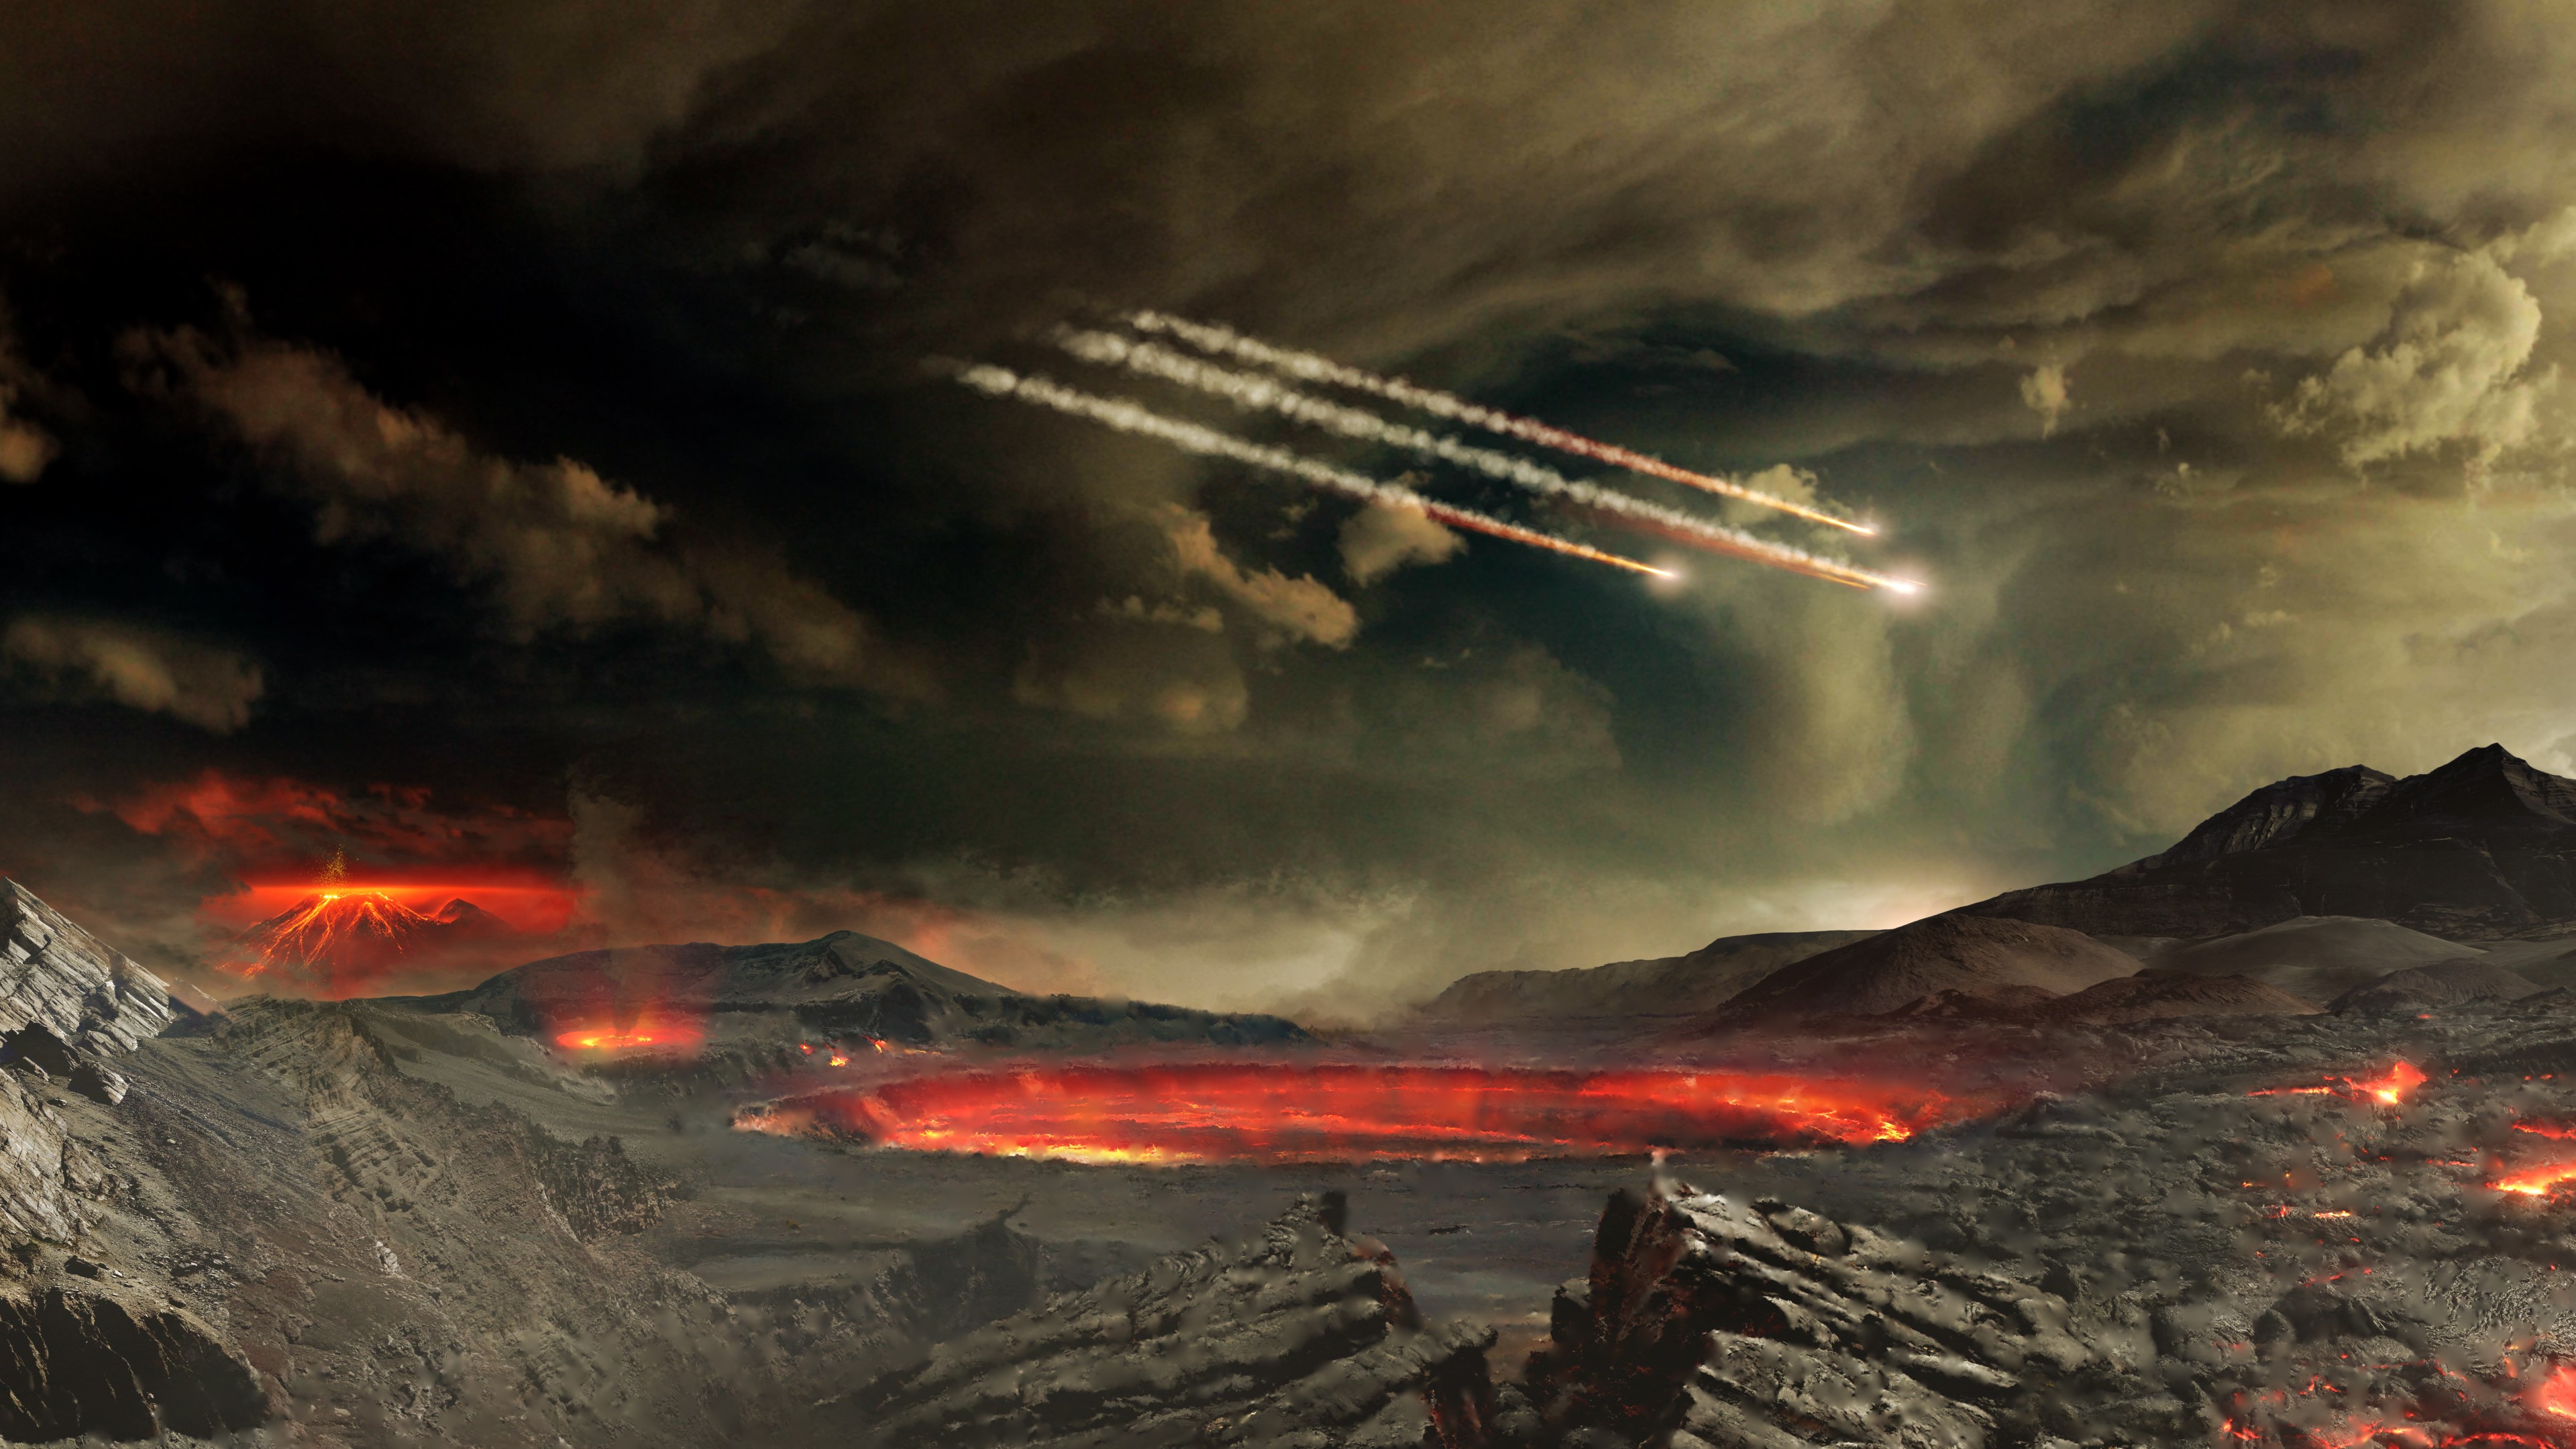 Gamma-rays may have helped meteorites seed Earth with the building blocks of life